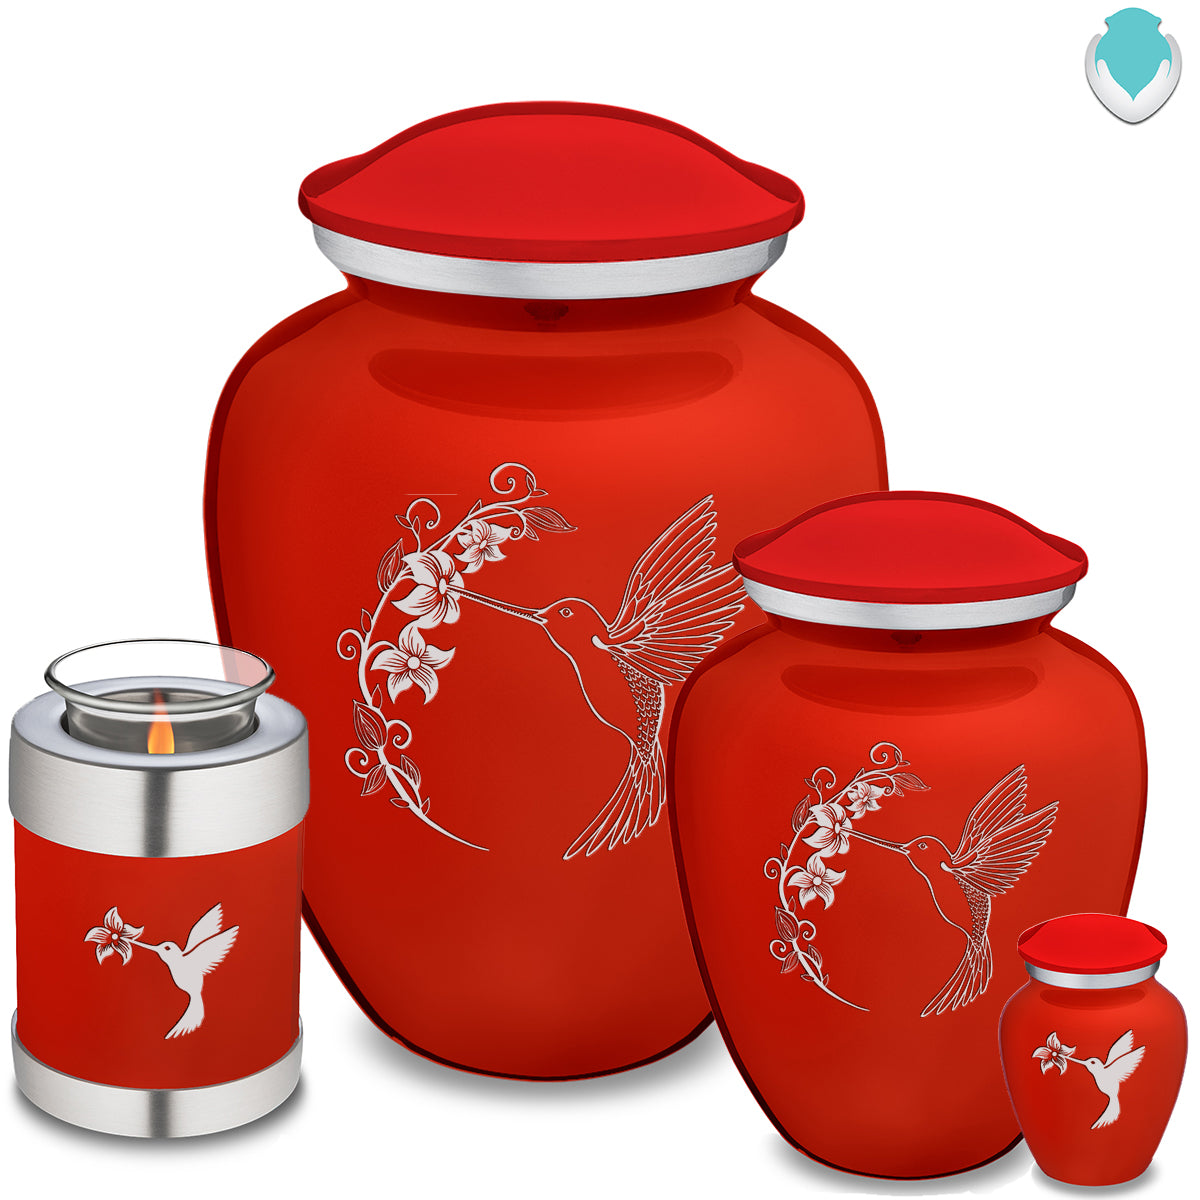 Adult Embrace Bright Red Hummingbird Cremation Urn